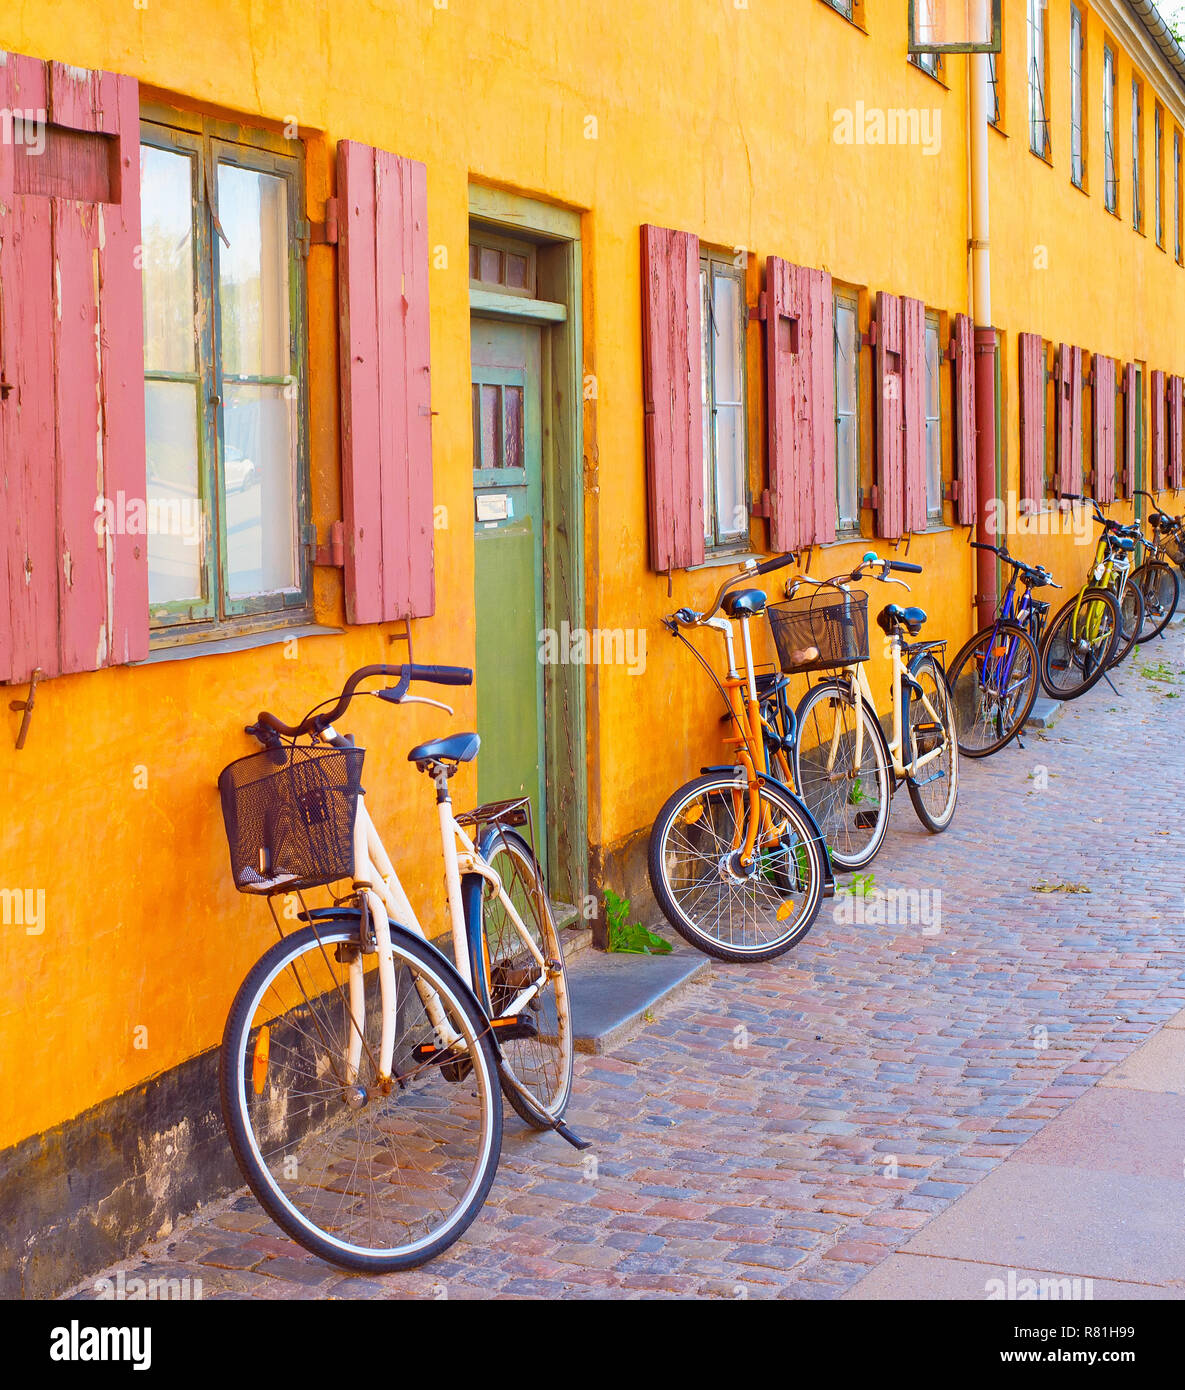 Bicycles along the old building wall. Copenhagen, Denmark Stock Photo